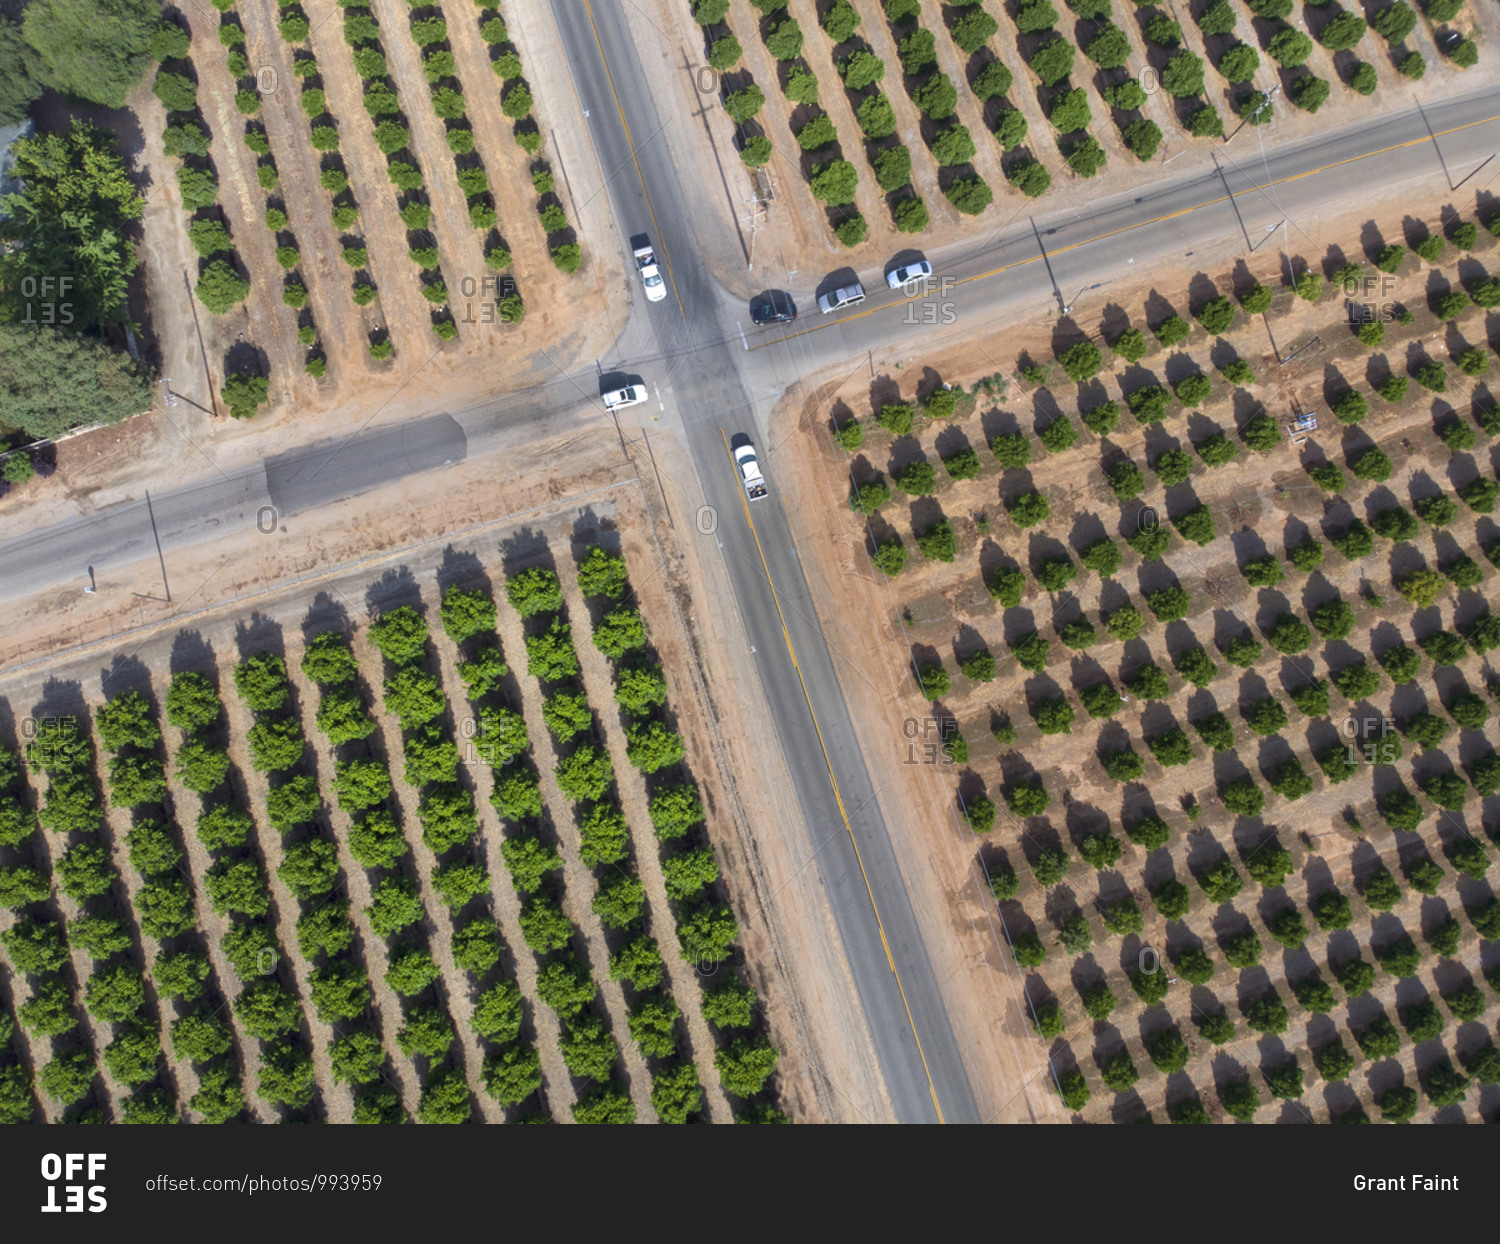 Traffic intersection near Yuba City surrounded by fruit tree farms in California, USA